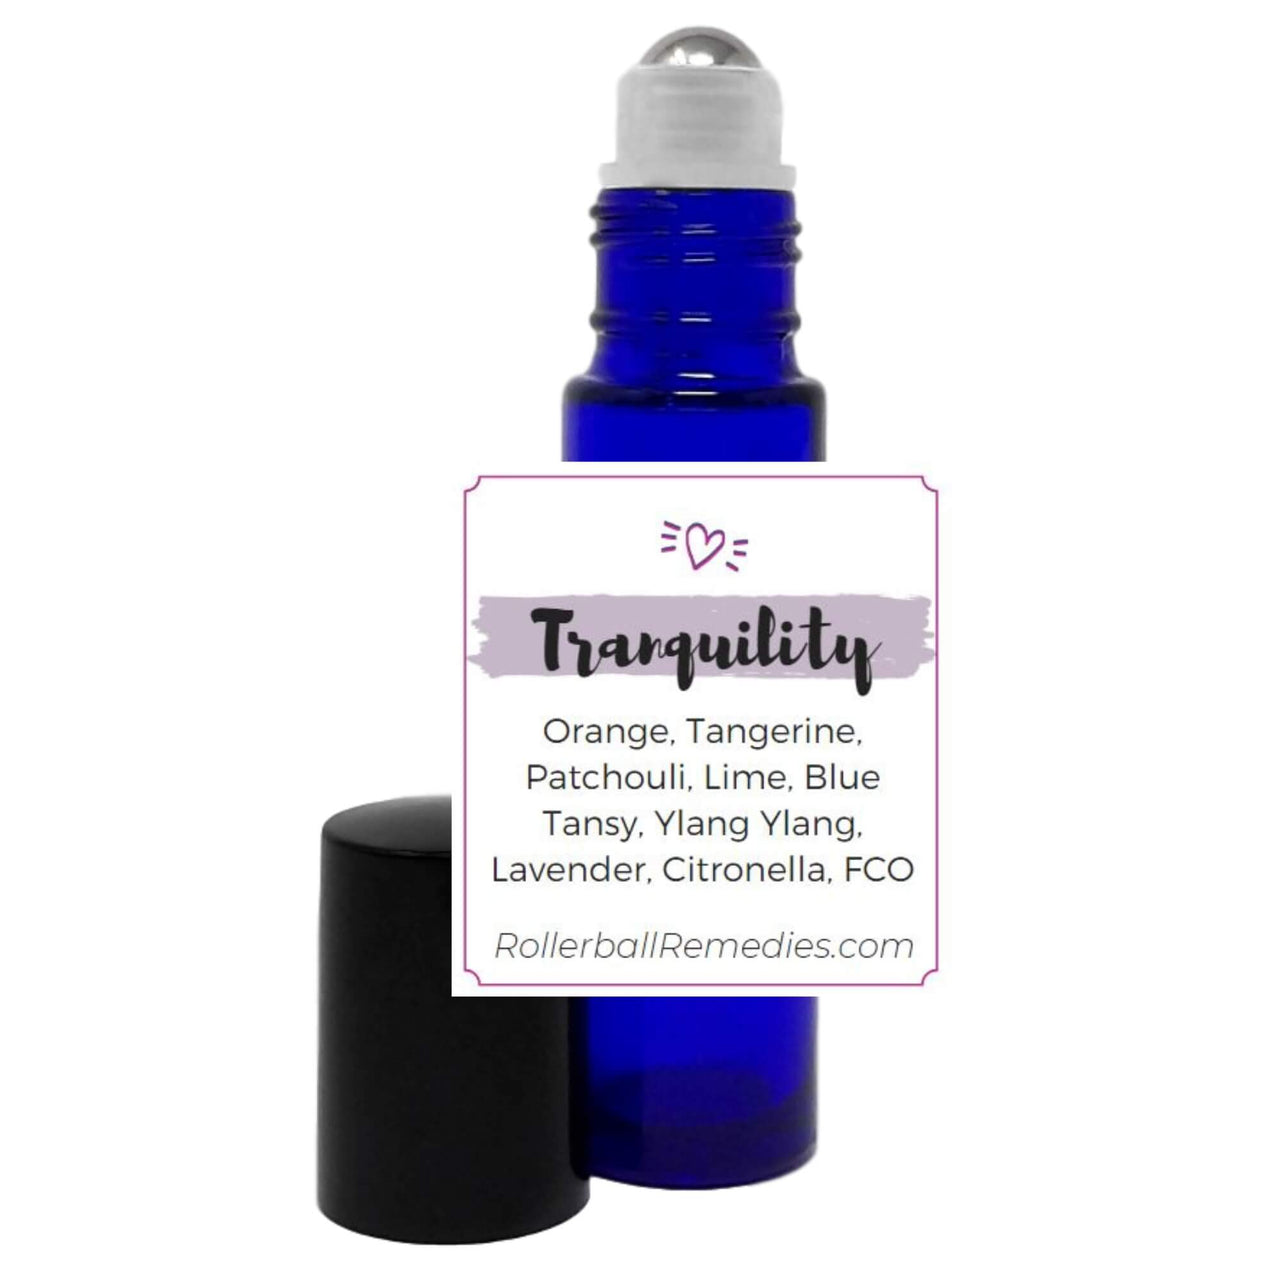 Tranquility Essential Oil Blend - 10 ml Roller Bottle with Orange, Tangerine, Patchouli, Lime, Blue Tansy, Ylang Ylang, Lavender, Citronella